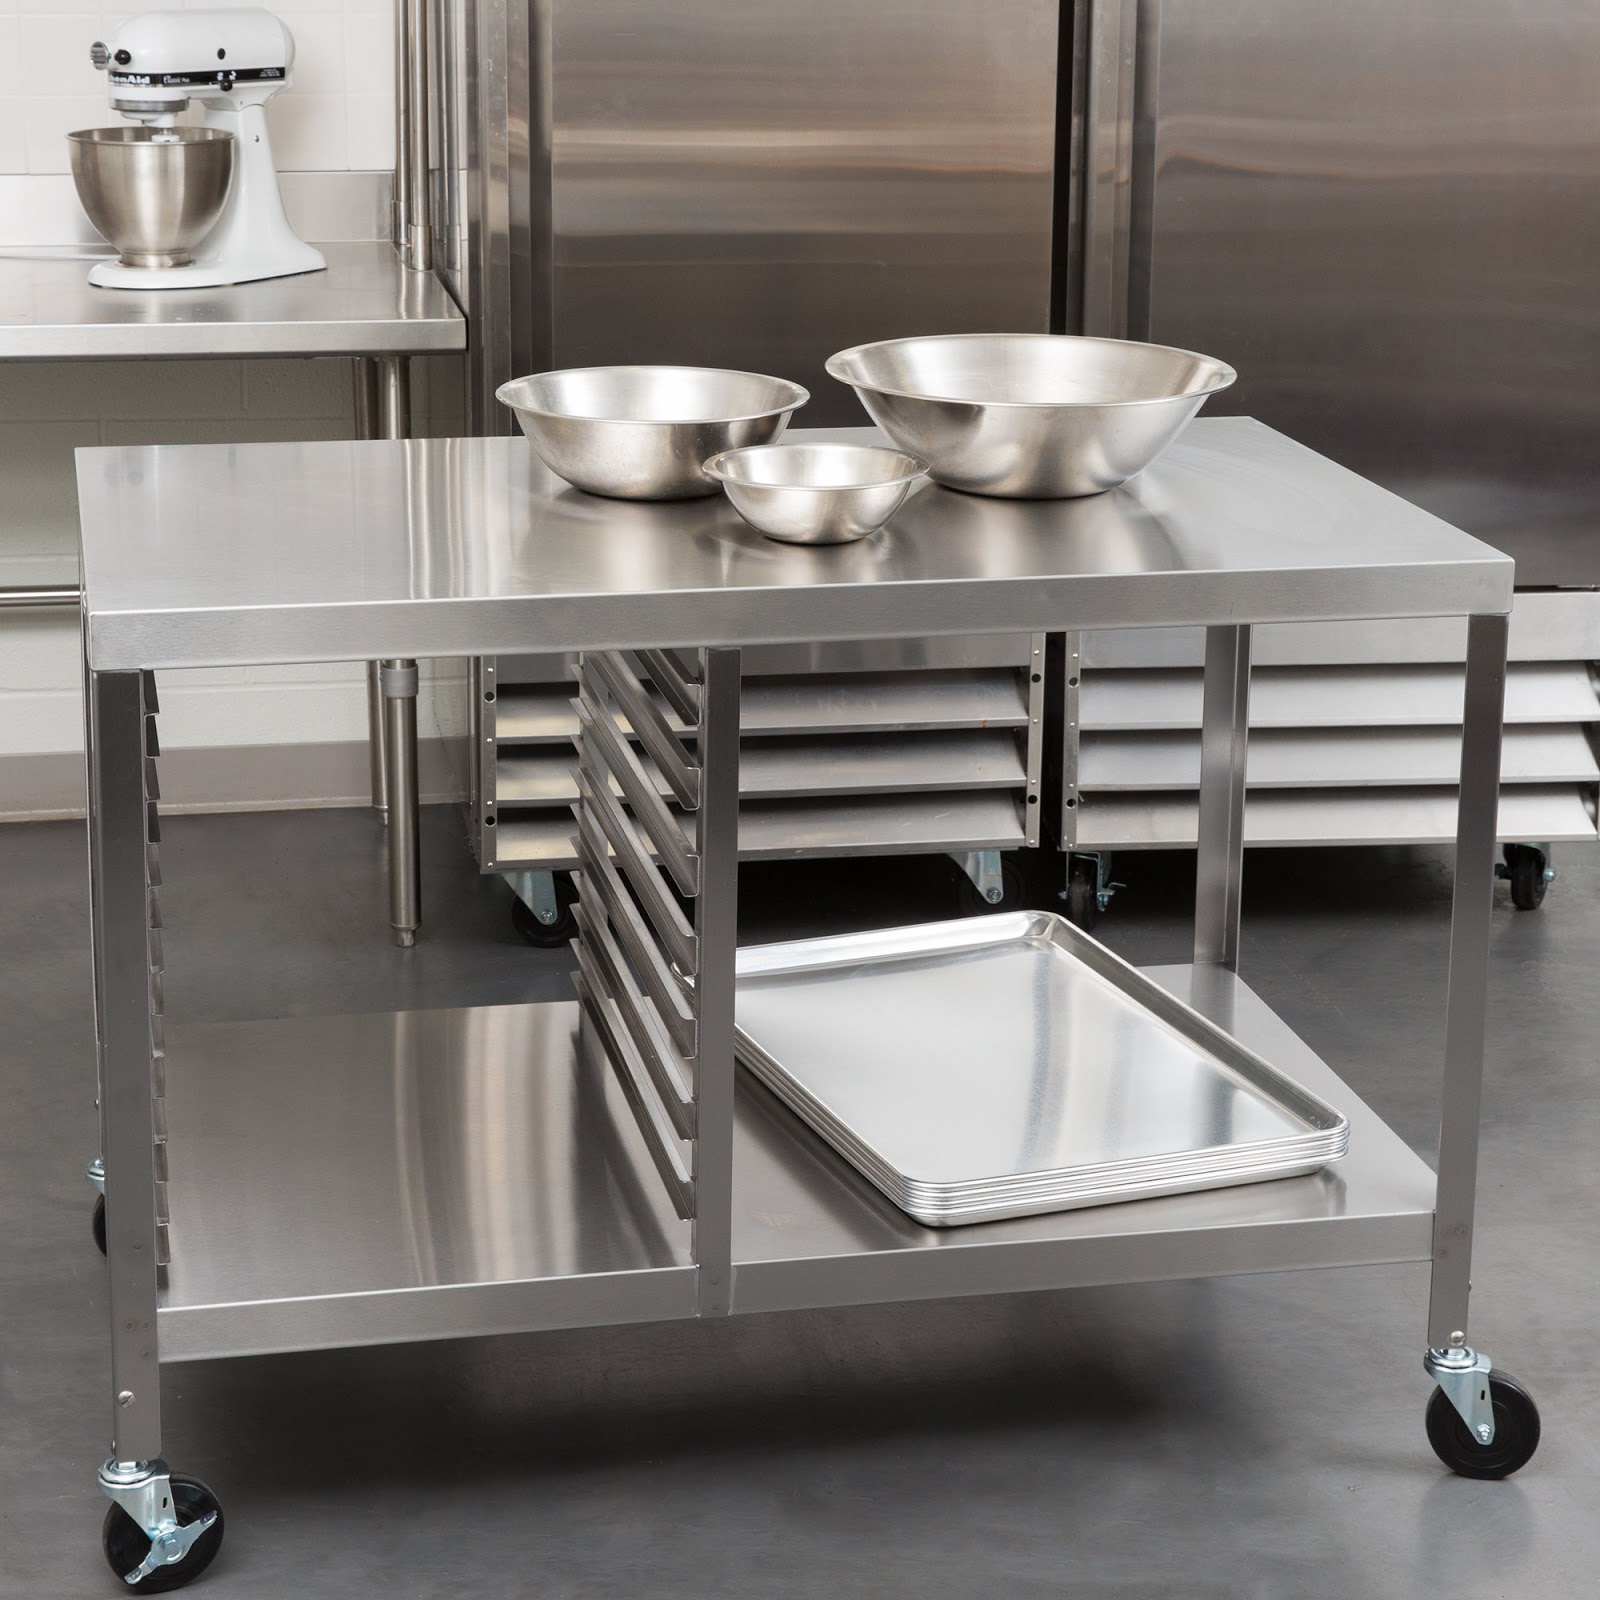  Meja Stainless Steel  For Bakery Rey 7tray REYMETAL COM 